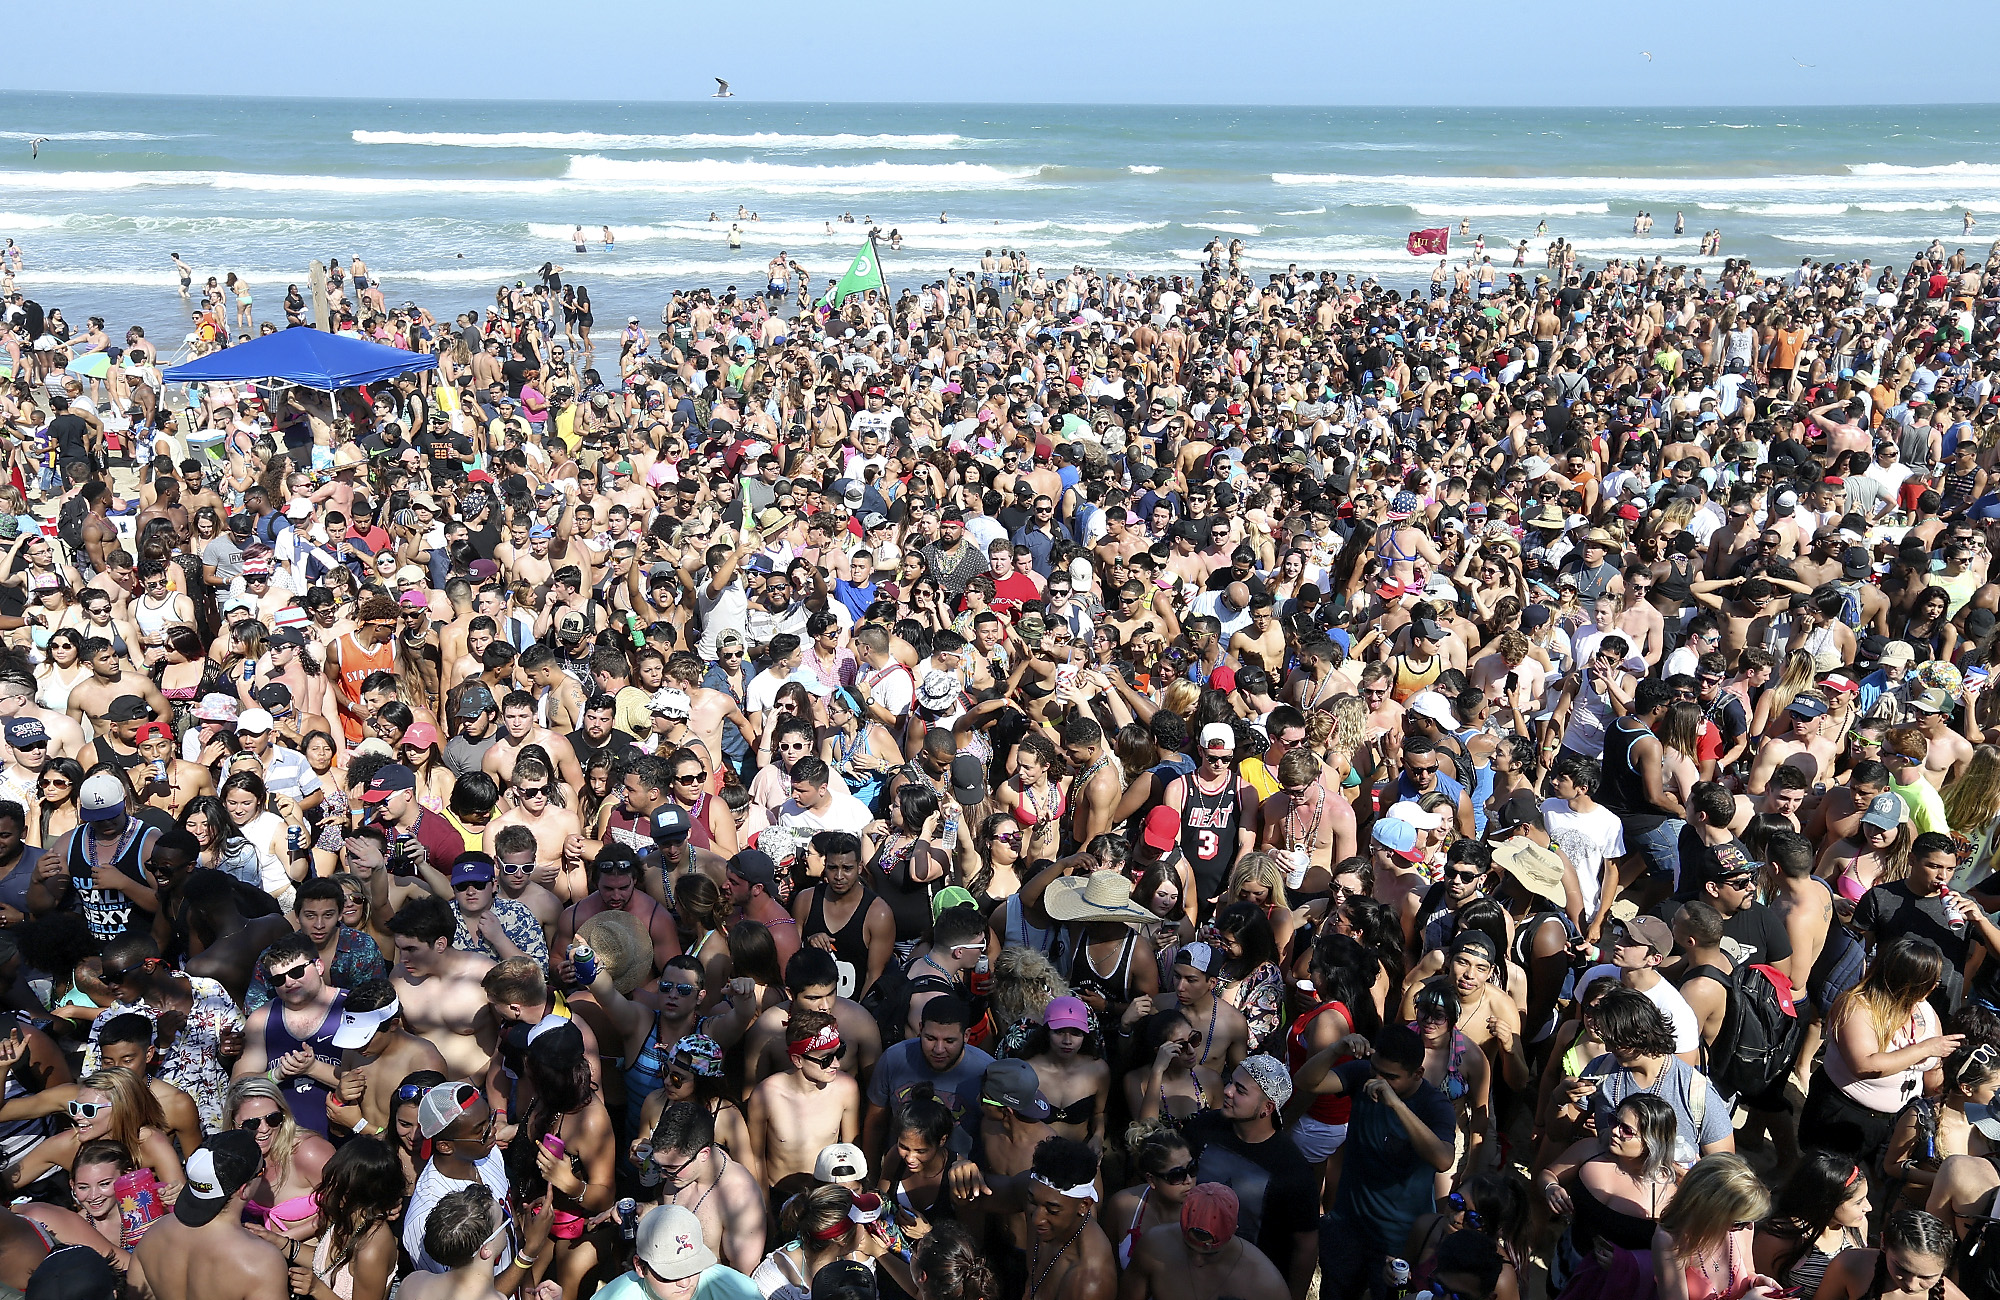 Spring break brings in $30.5 million for South Padre Island, city officials...